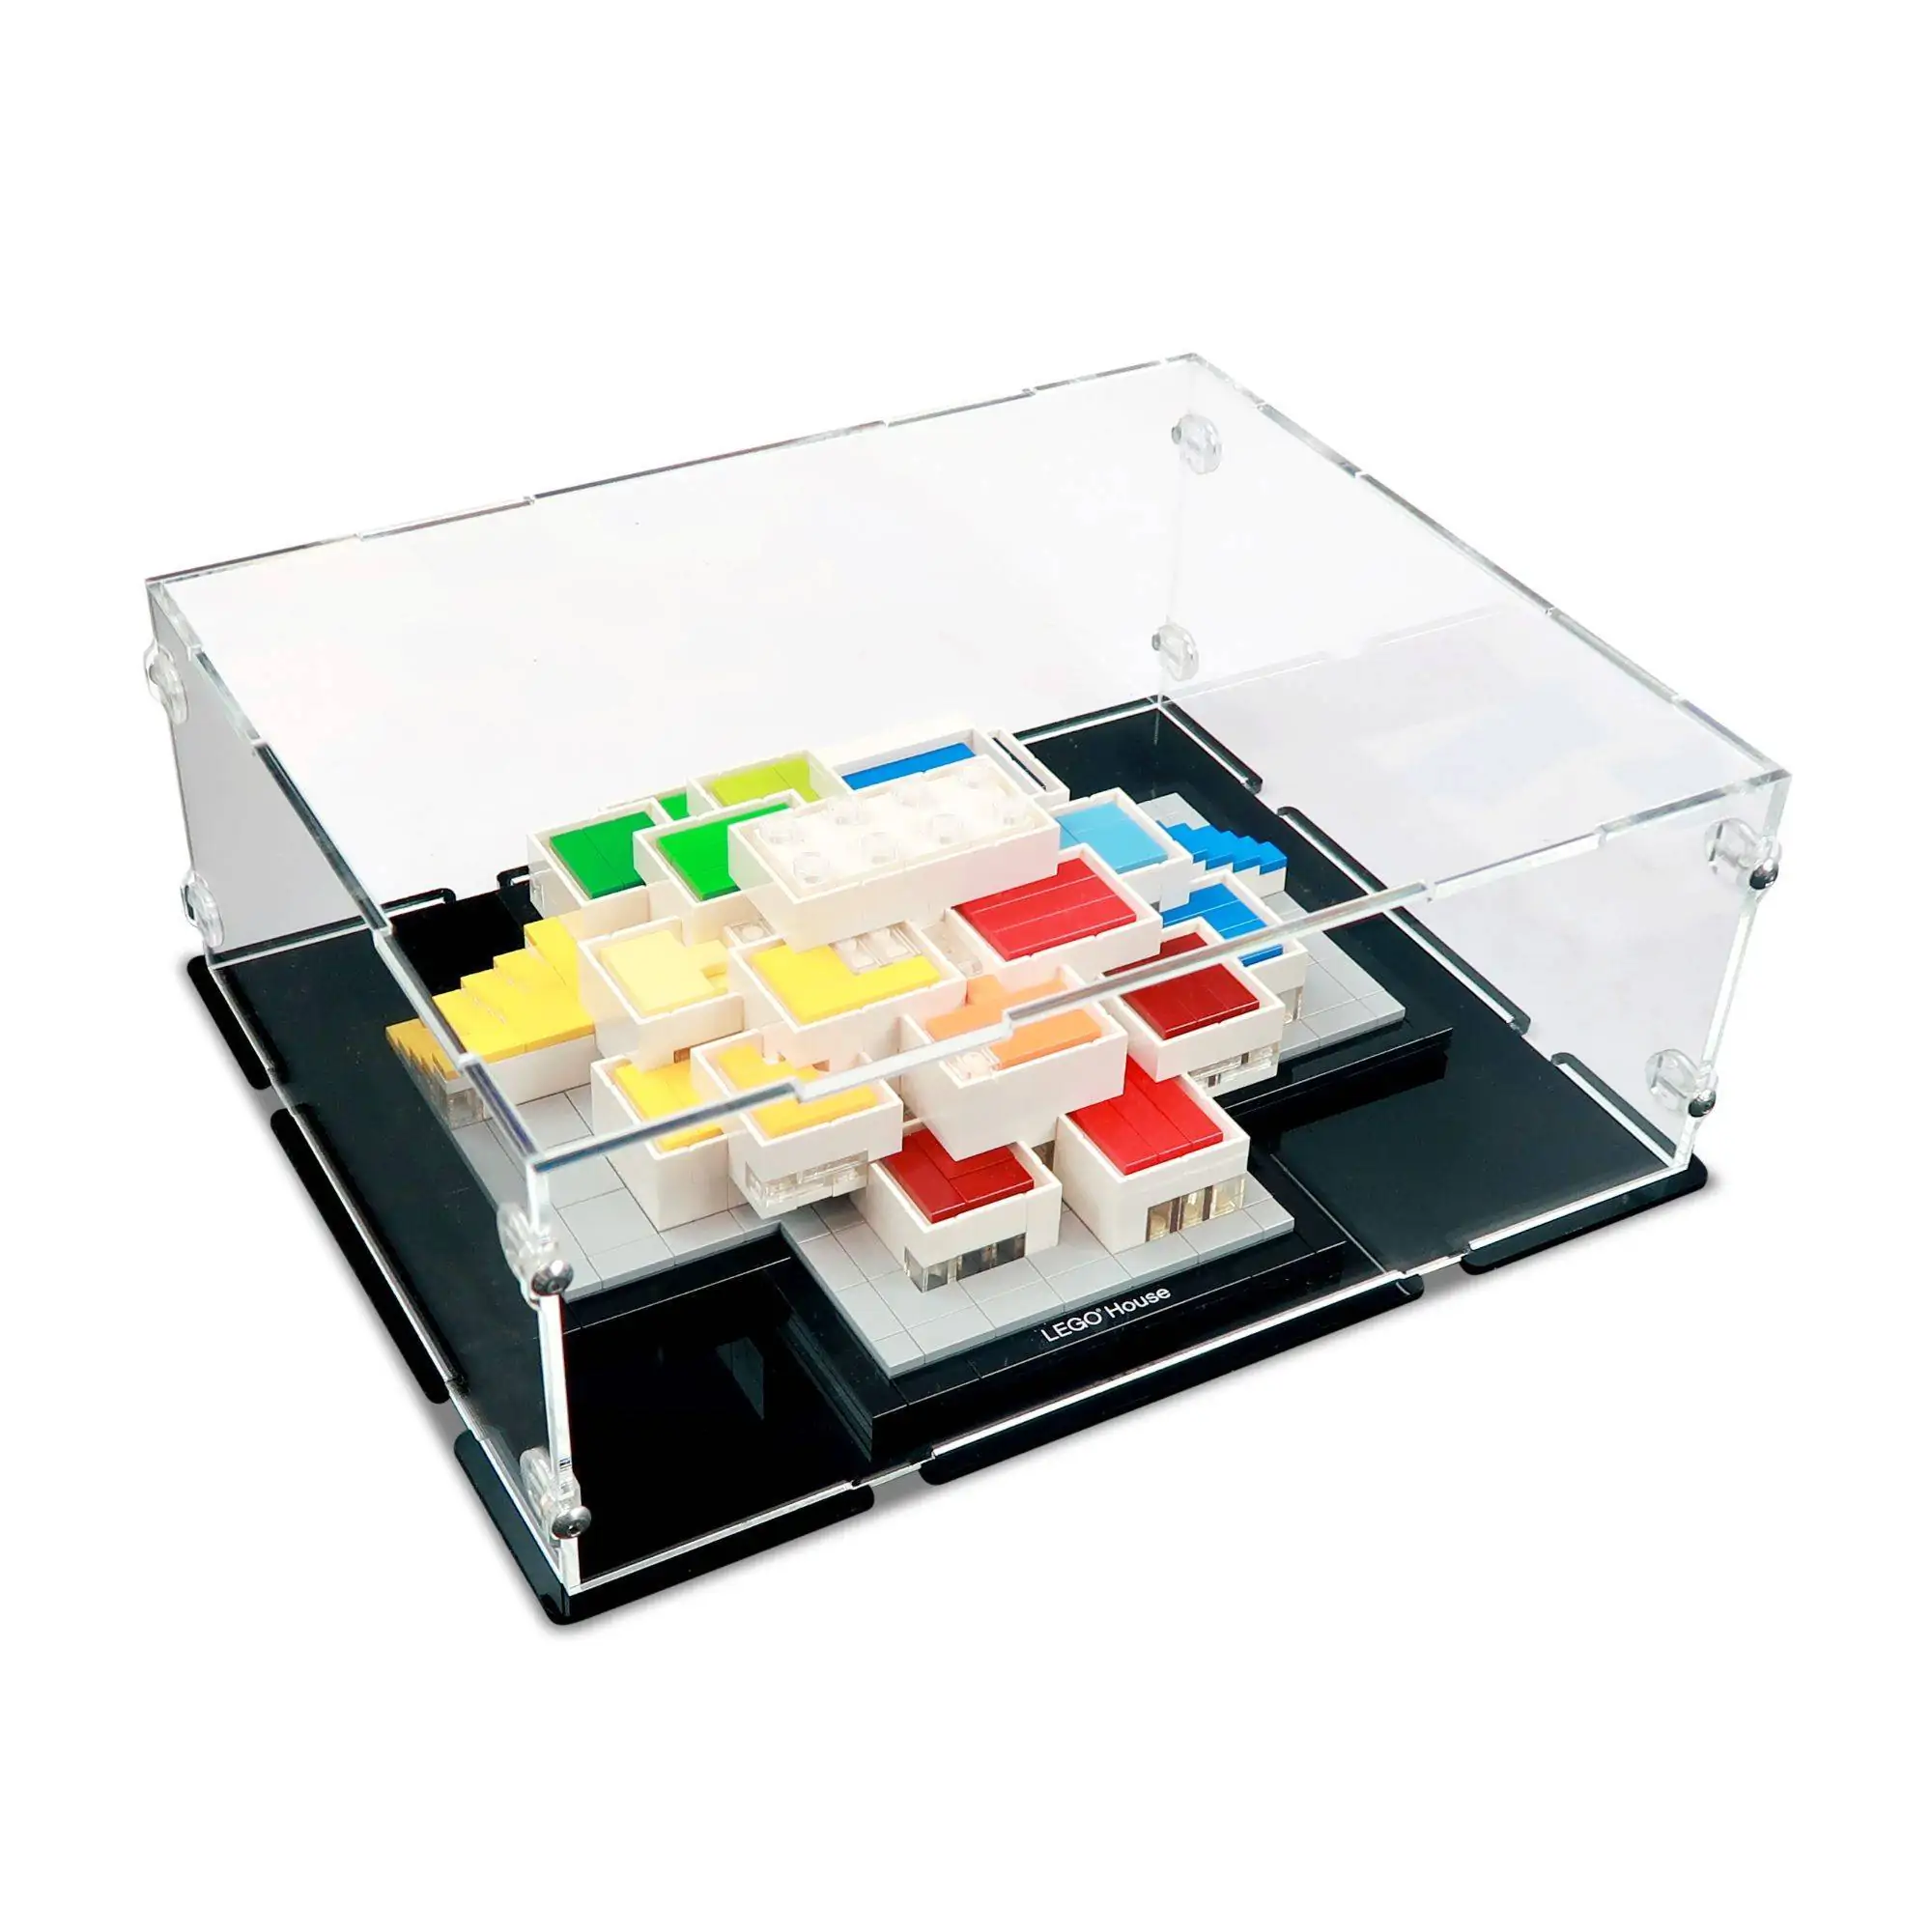 Stereotype dateret overgive Acrylic Display Case for LEGO House | iDisplayit